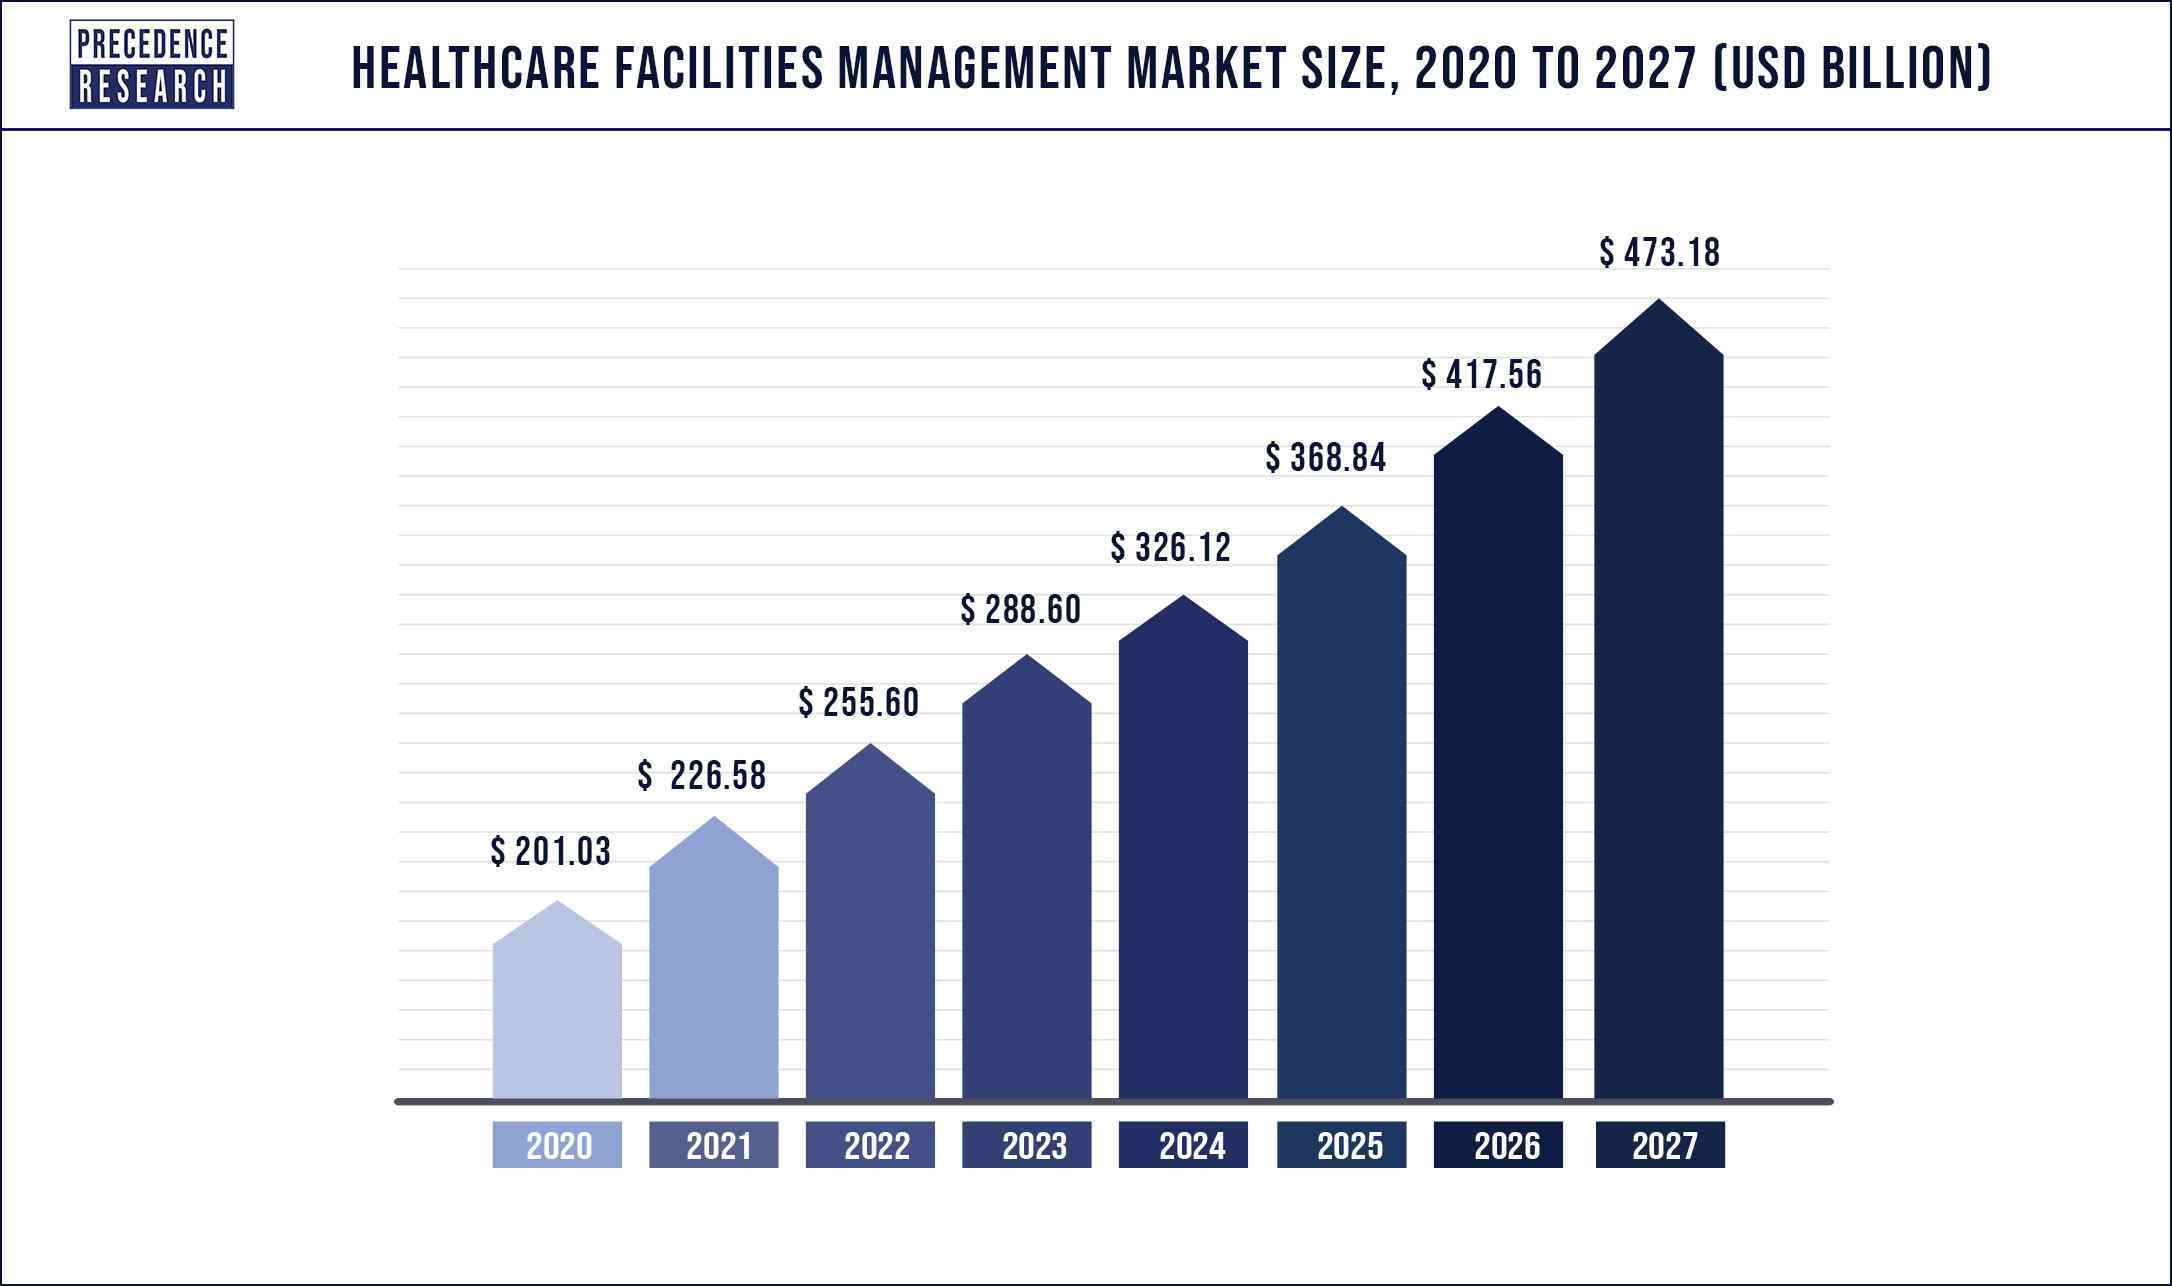 Healthcare Facilities Management Market Size 2020 to 2027